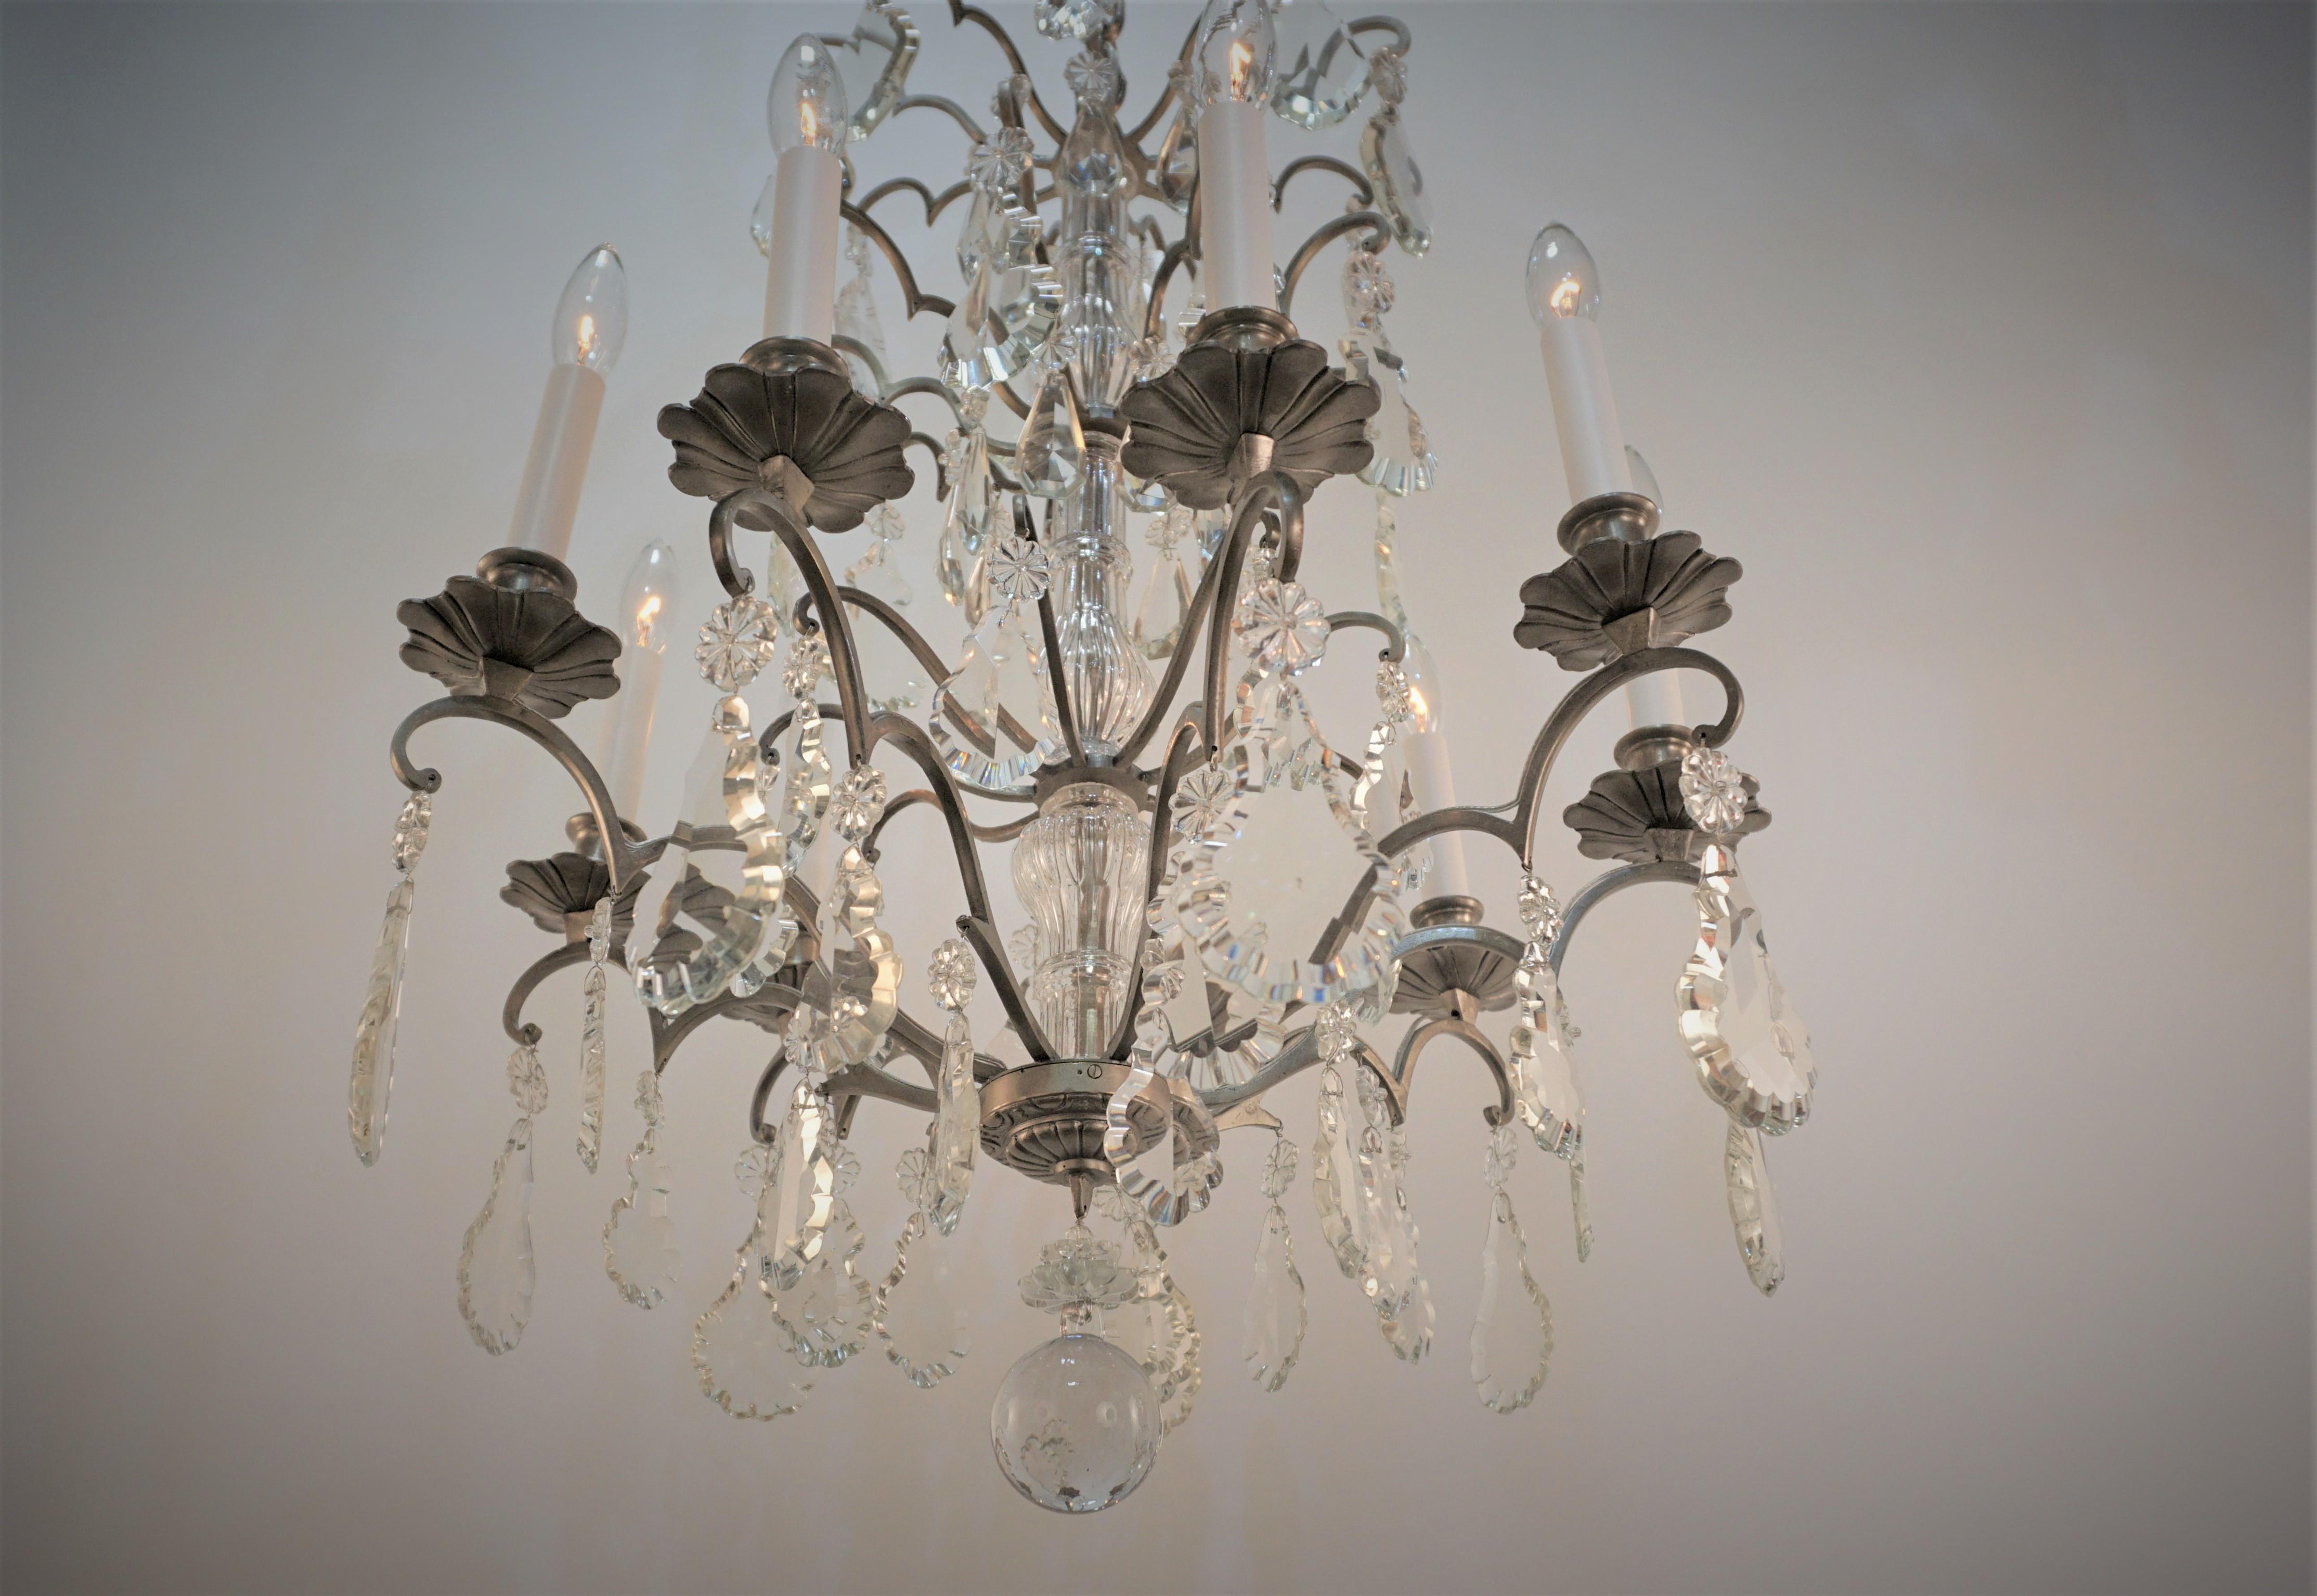 Elegant eight arm crystal chandelier with semi oxidized (pewter color) silver on bronze frame 1930's chandelier.
Minimum height fully installed 32